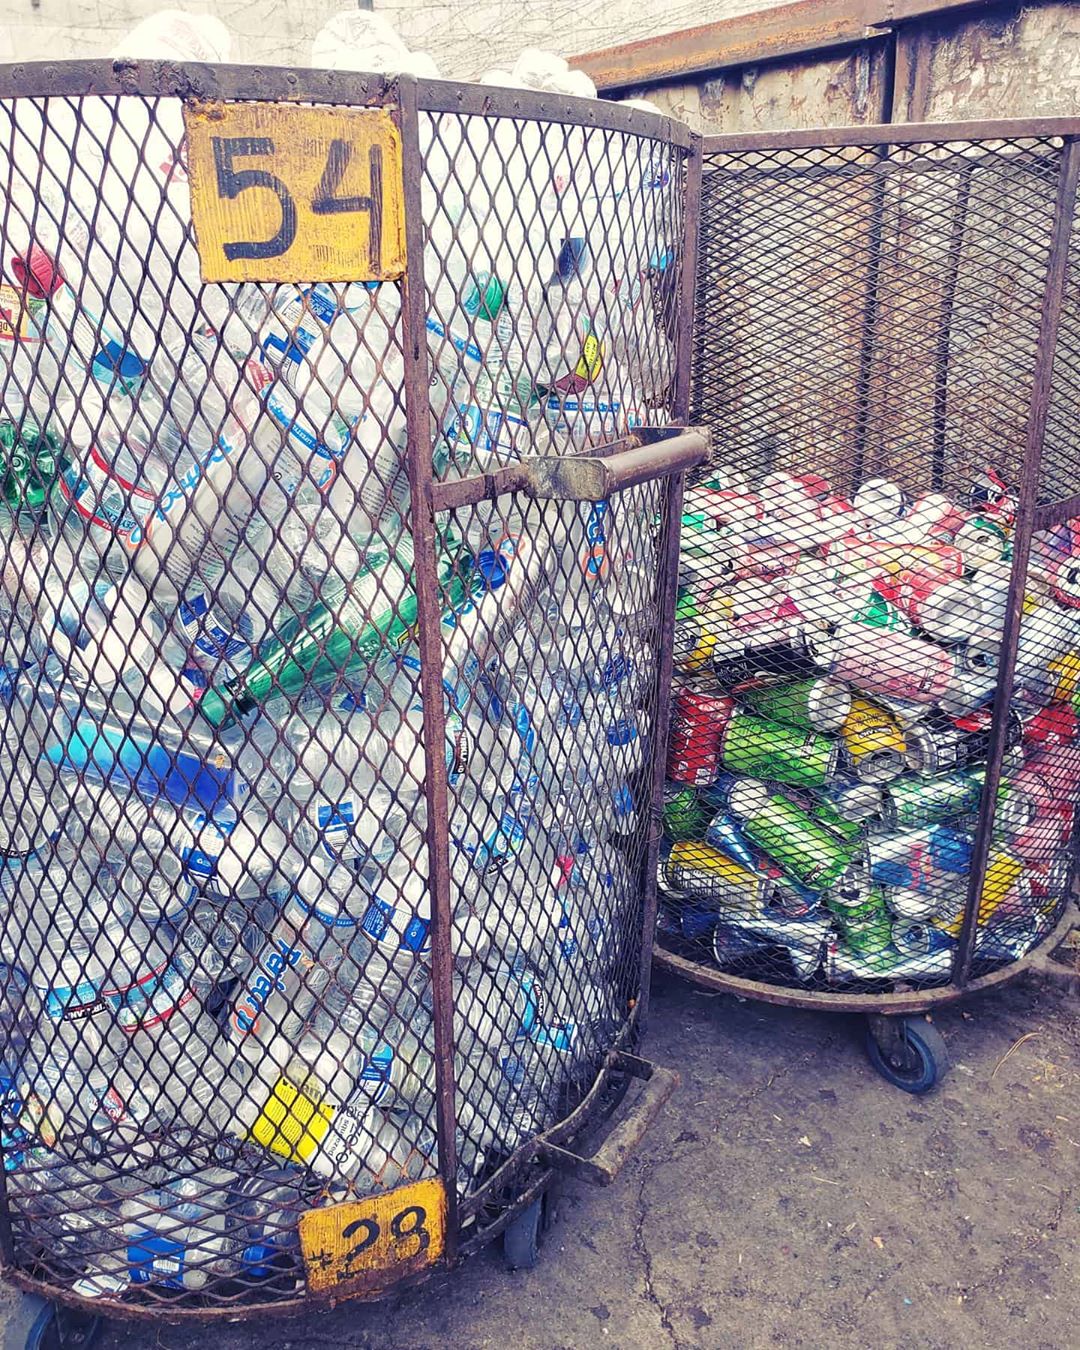 Recycle bins filled with cans and bottles. Photo by Instagram user @globalmetalrecyclinginc